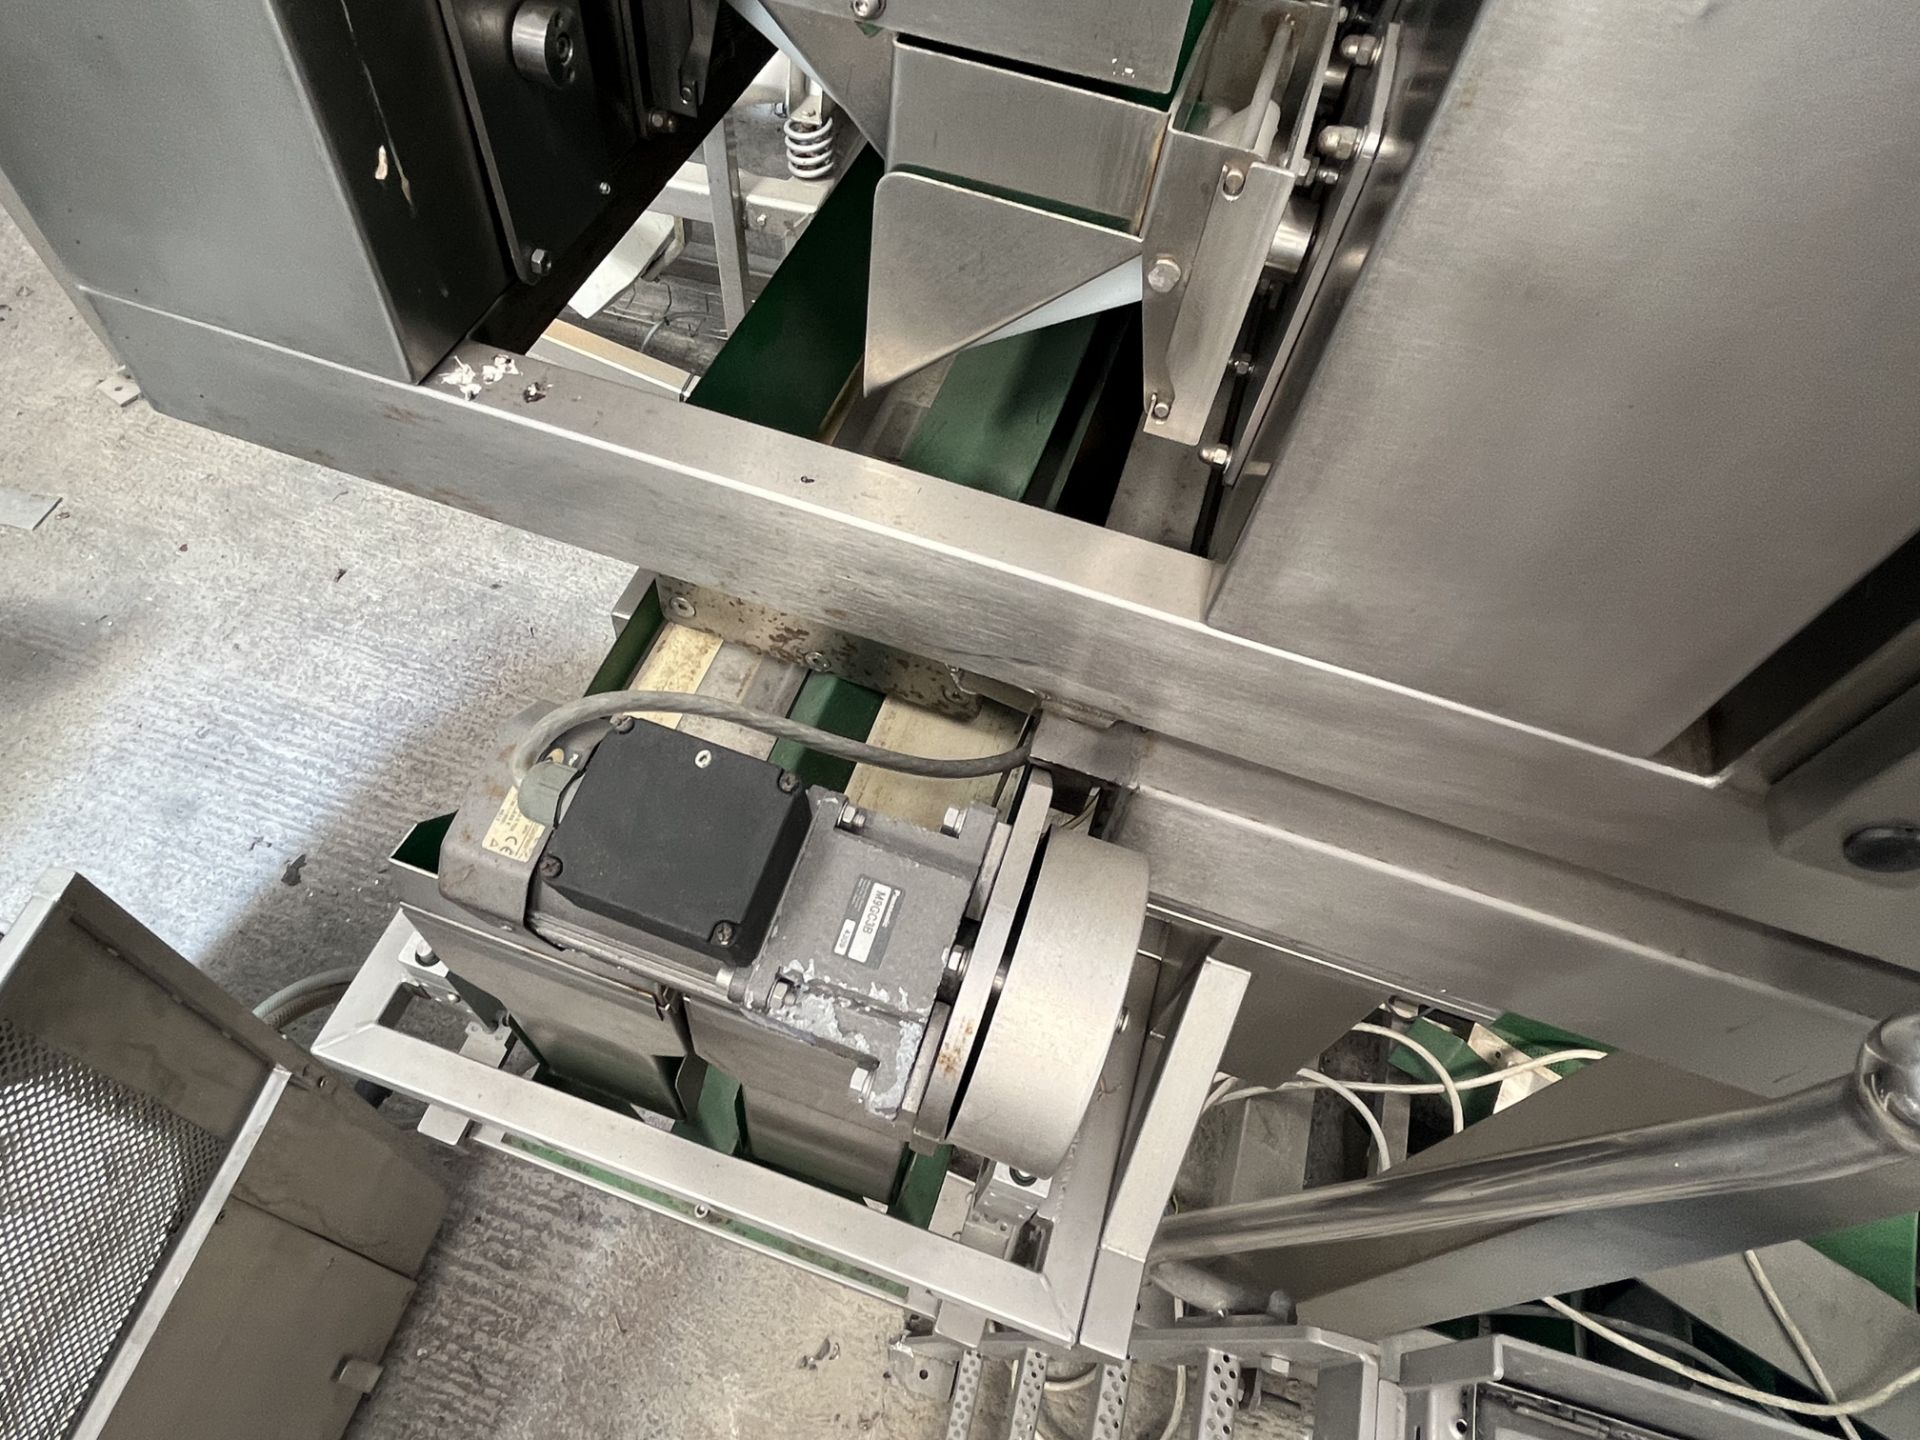 WARD BECKER LINEAR MULTIHEAD WEIGHER (1056) - Image 9 of 9